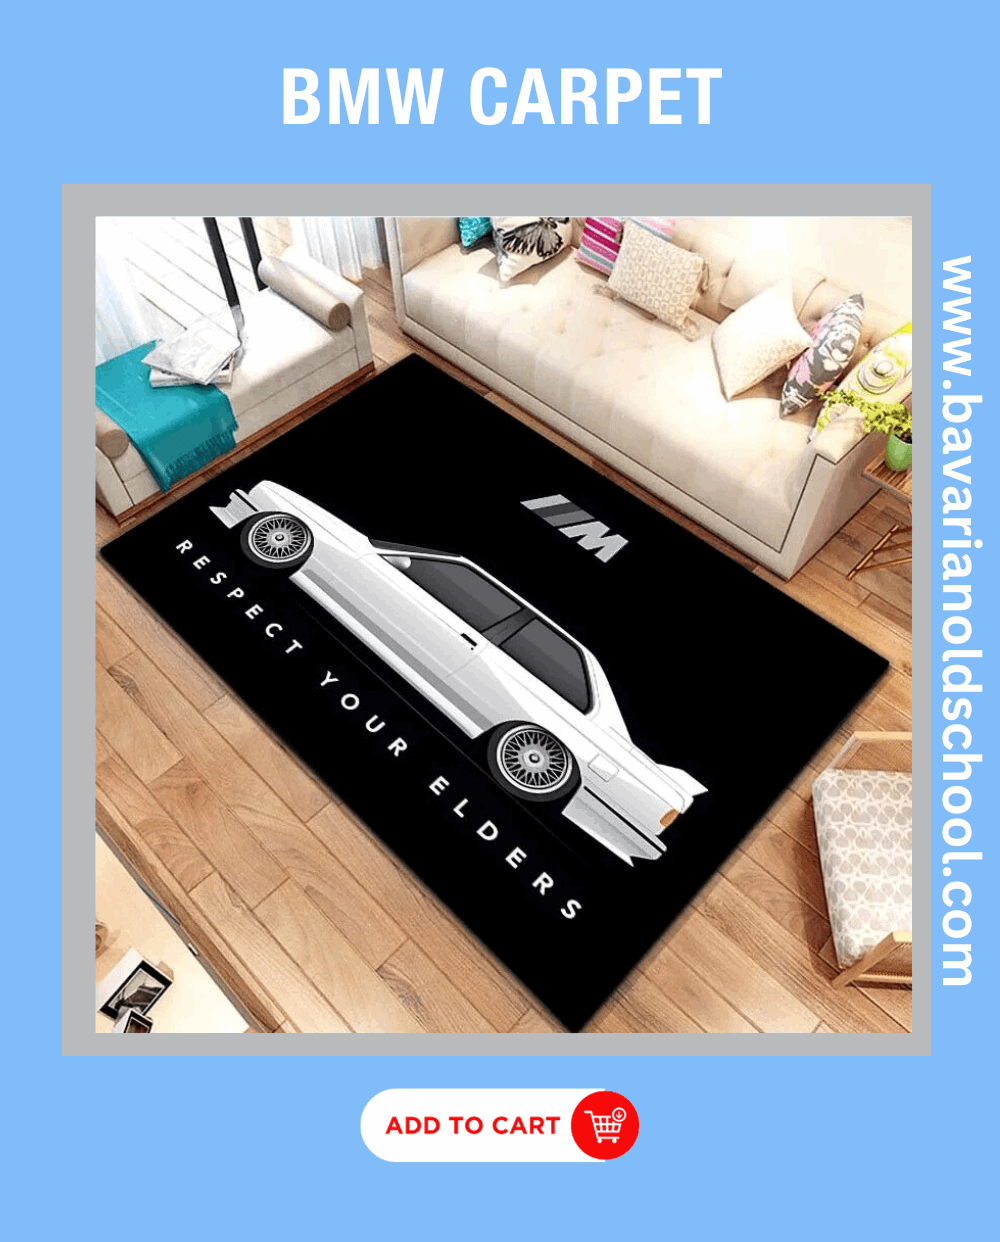 bmw carpet with bmw logo and pictures in all size bavarian old school, bmw bedding set for single or double bed bavarian old school, Bavarian Old School, germany, slovenia, austria, bmw owner, bmw lovers, bmw old school, dream garage, bmw collection, dream car, dream bmw, car care, bmw detailing, m3, m5, m8, z8, e30, e 36, e39, e46, bmw models, bmw m power, bmw repair, bmw service, bmw selling, bmw dealer, old bmw, classic cars, vintage cars, old school